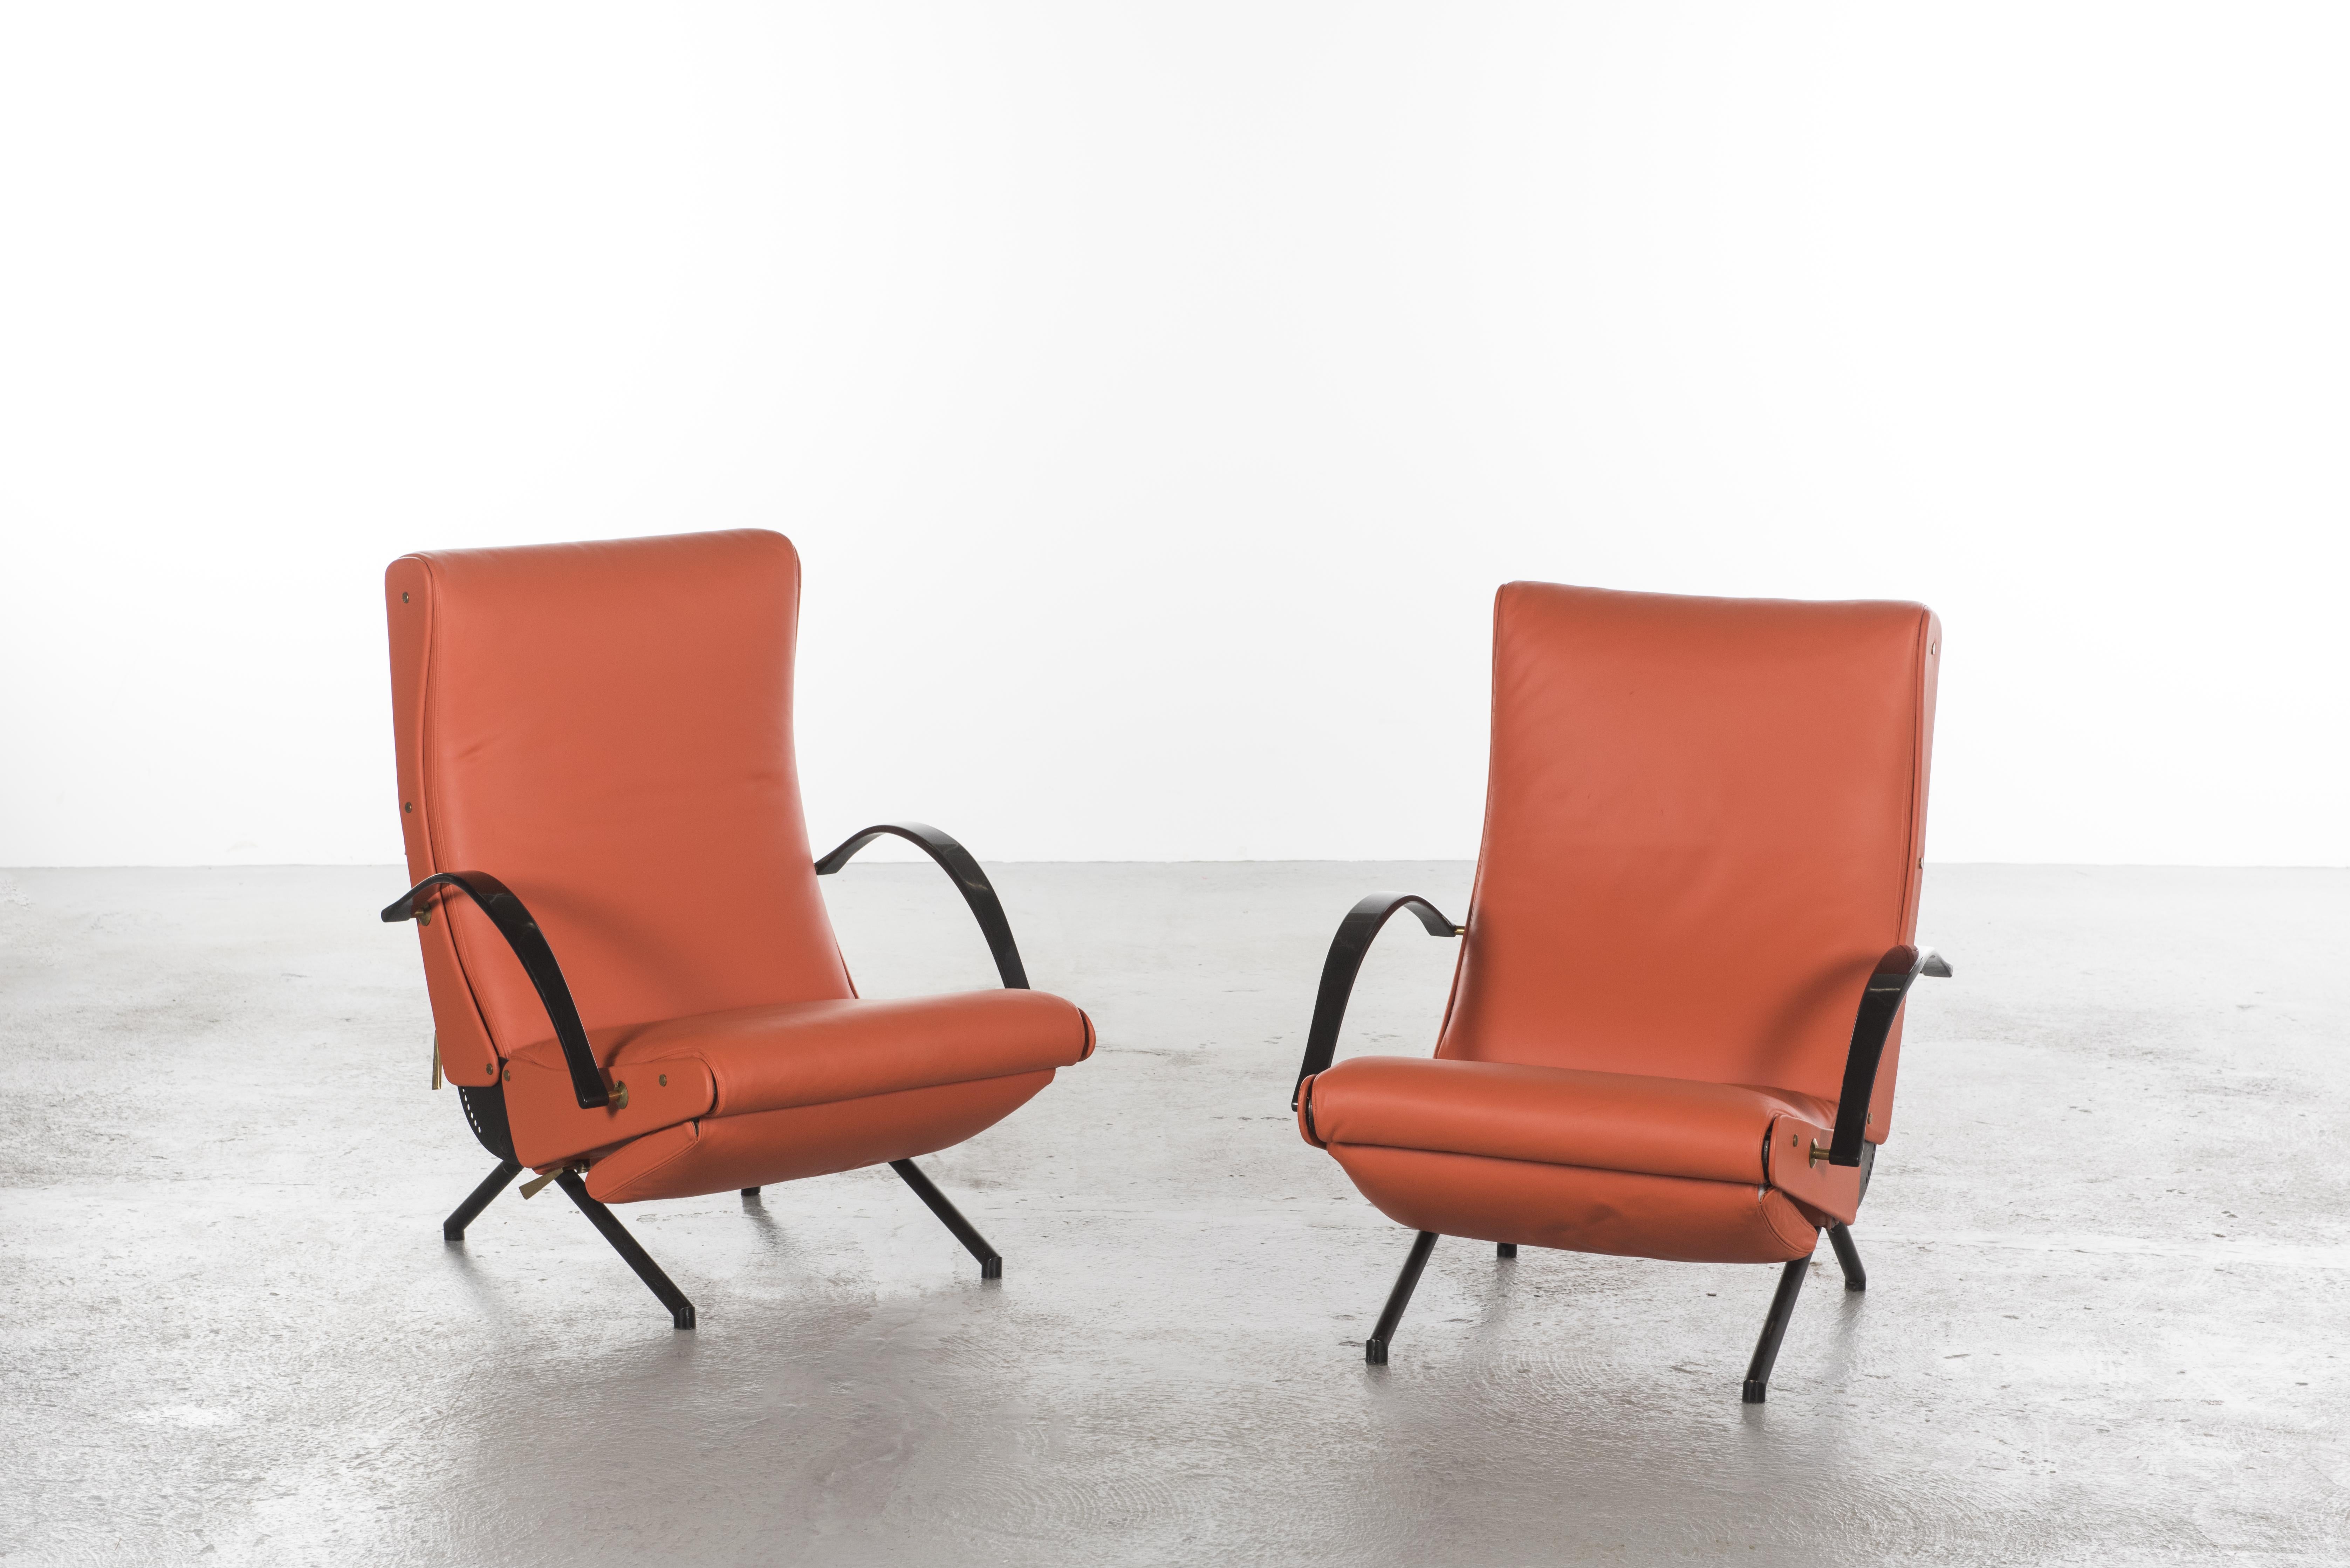 
First edition P40 model lounges chairs by Osvaldo Borsani for Tecno.
This pair is in beautiful orange Hermes color Leather.

This model was produced by Tecno between 1955 and 1959. 
The 1st edition model is different in two points: no